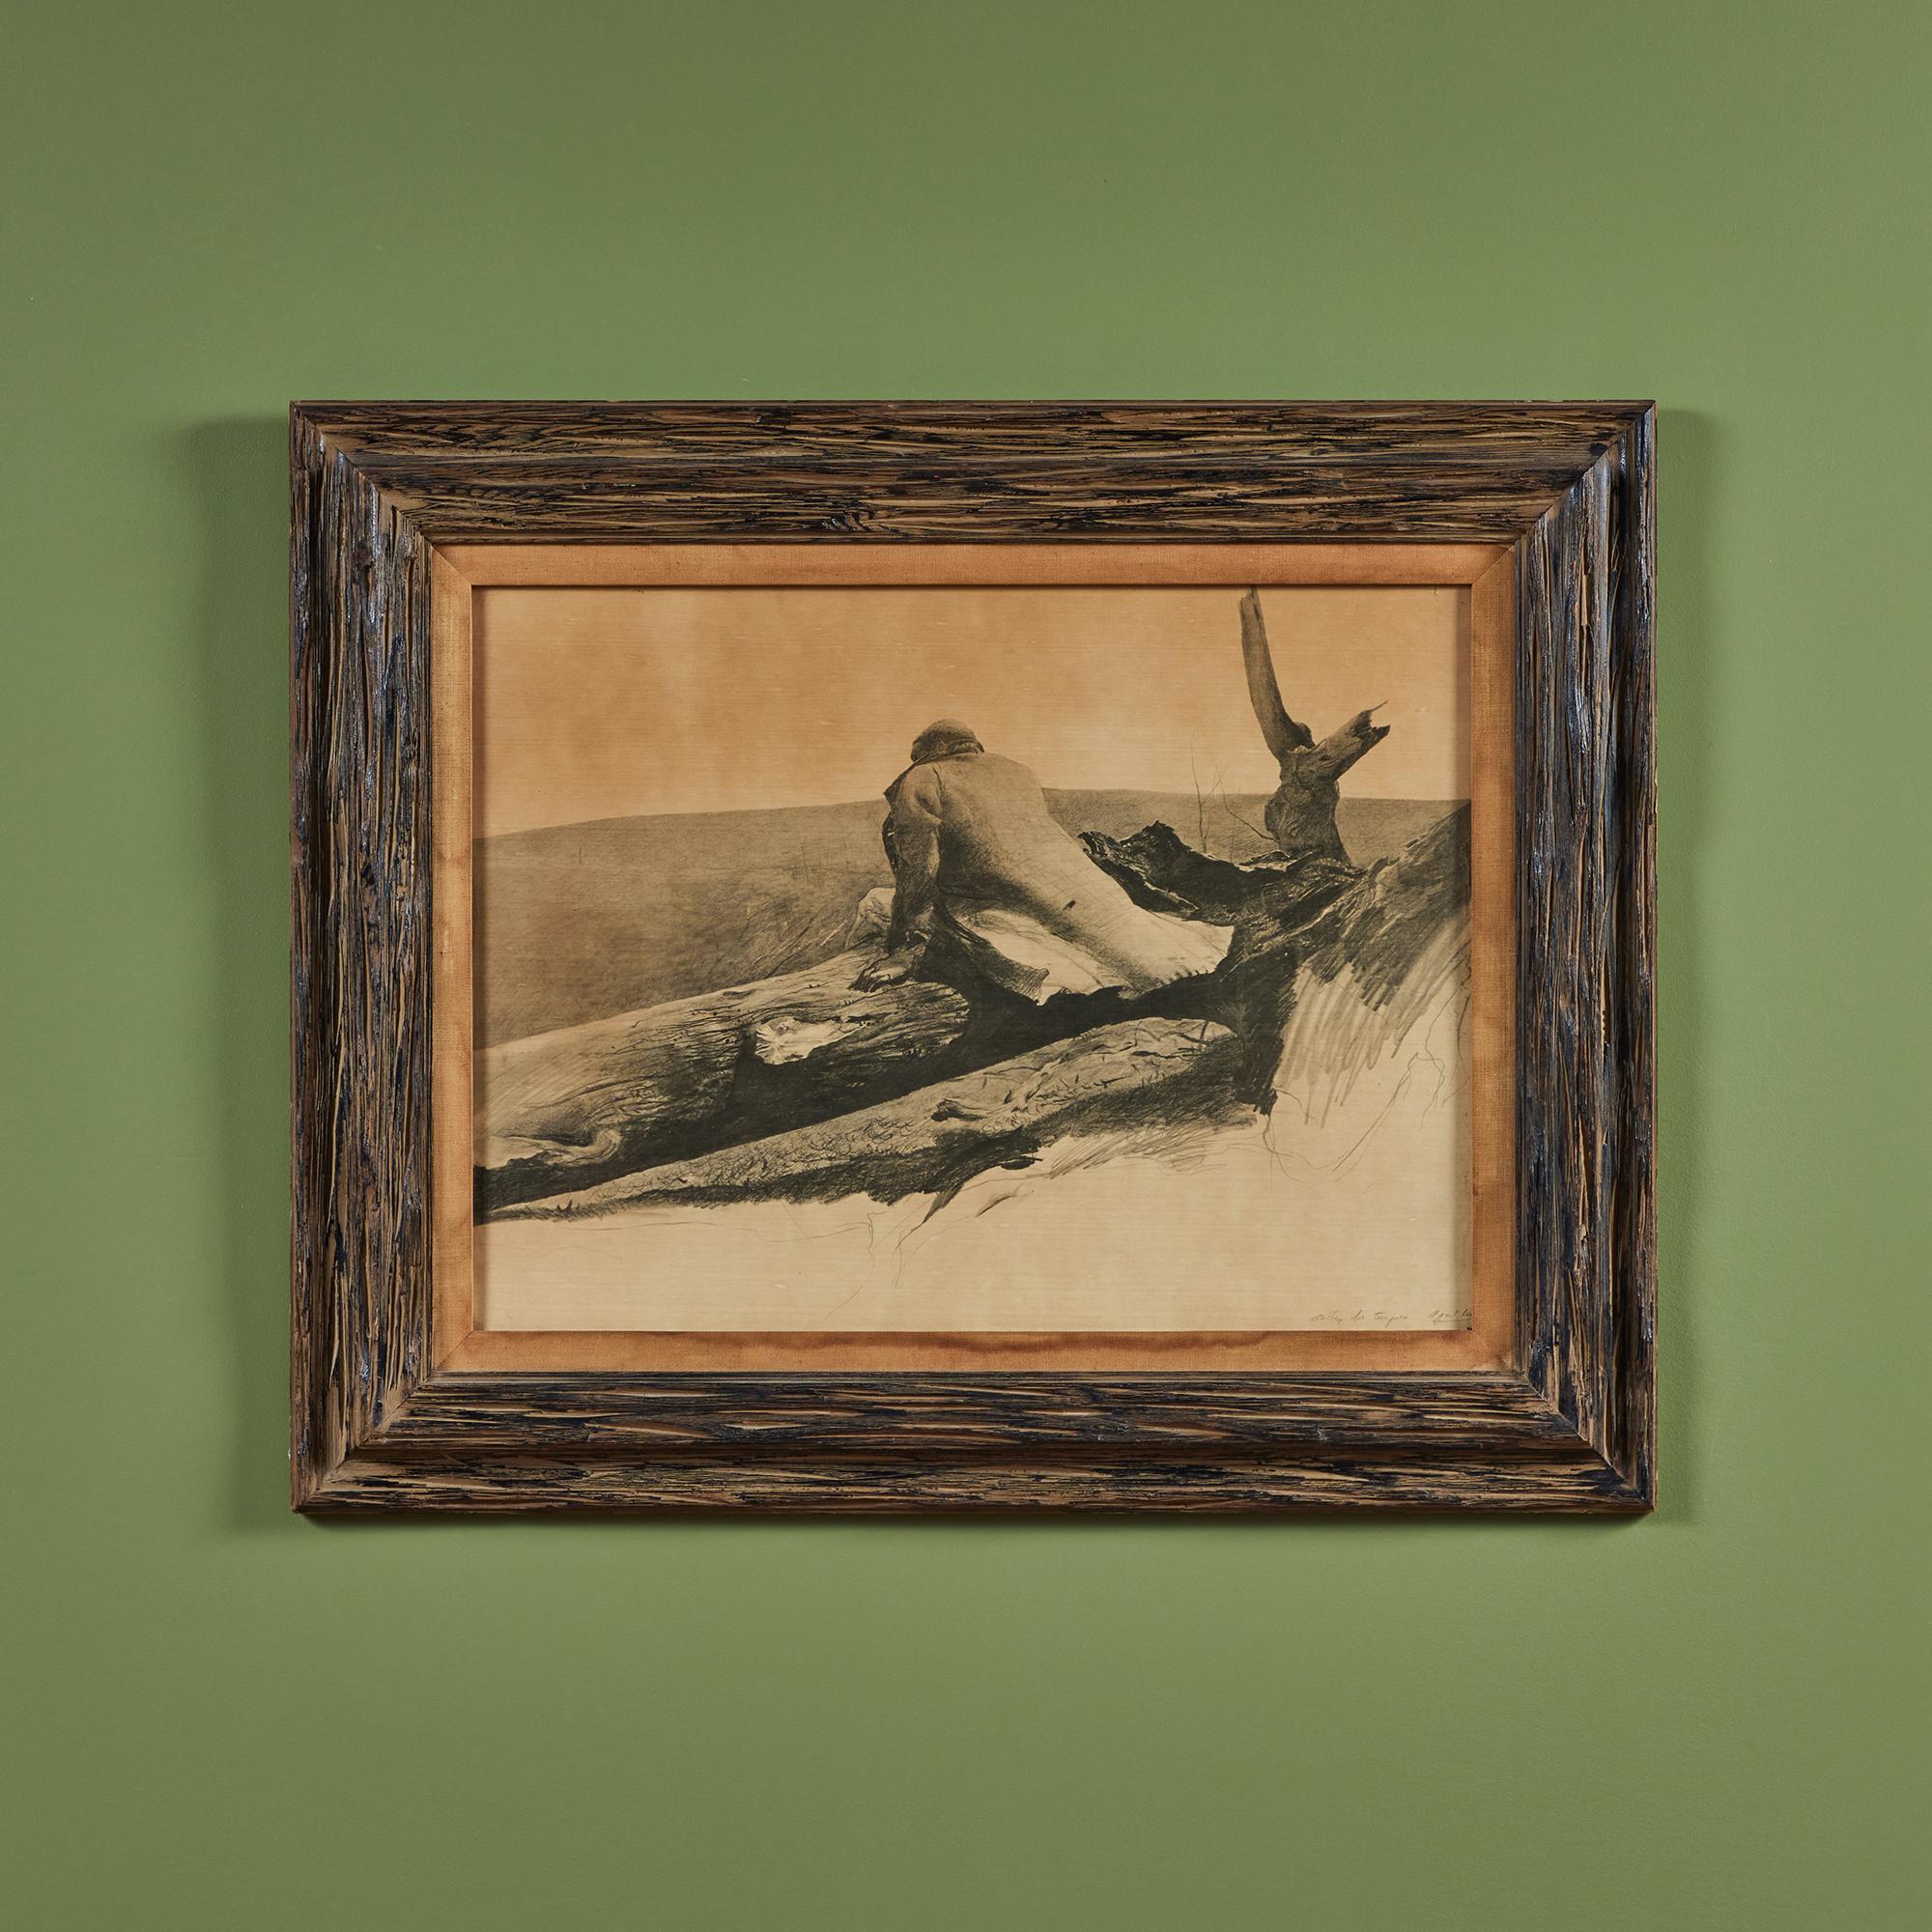 Framed lithograph of Andrew Wyeth's 1952 work, April Wind. 

Dimensions
32” width x 26” height and extends 1.5” from the wall. 

Condition
Good vintage condition; professionally cleaned.